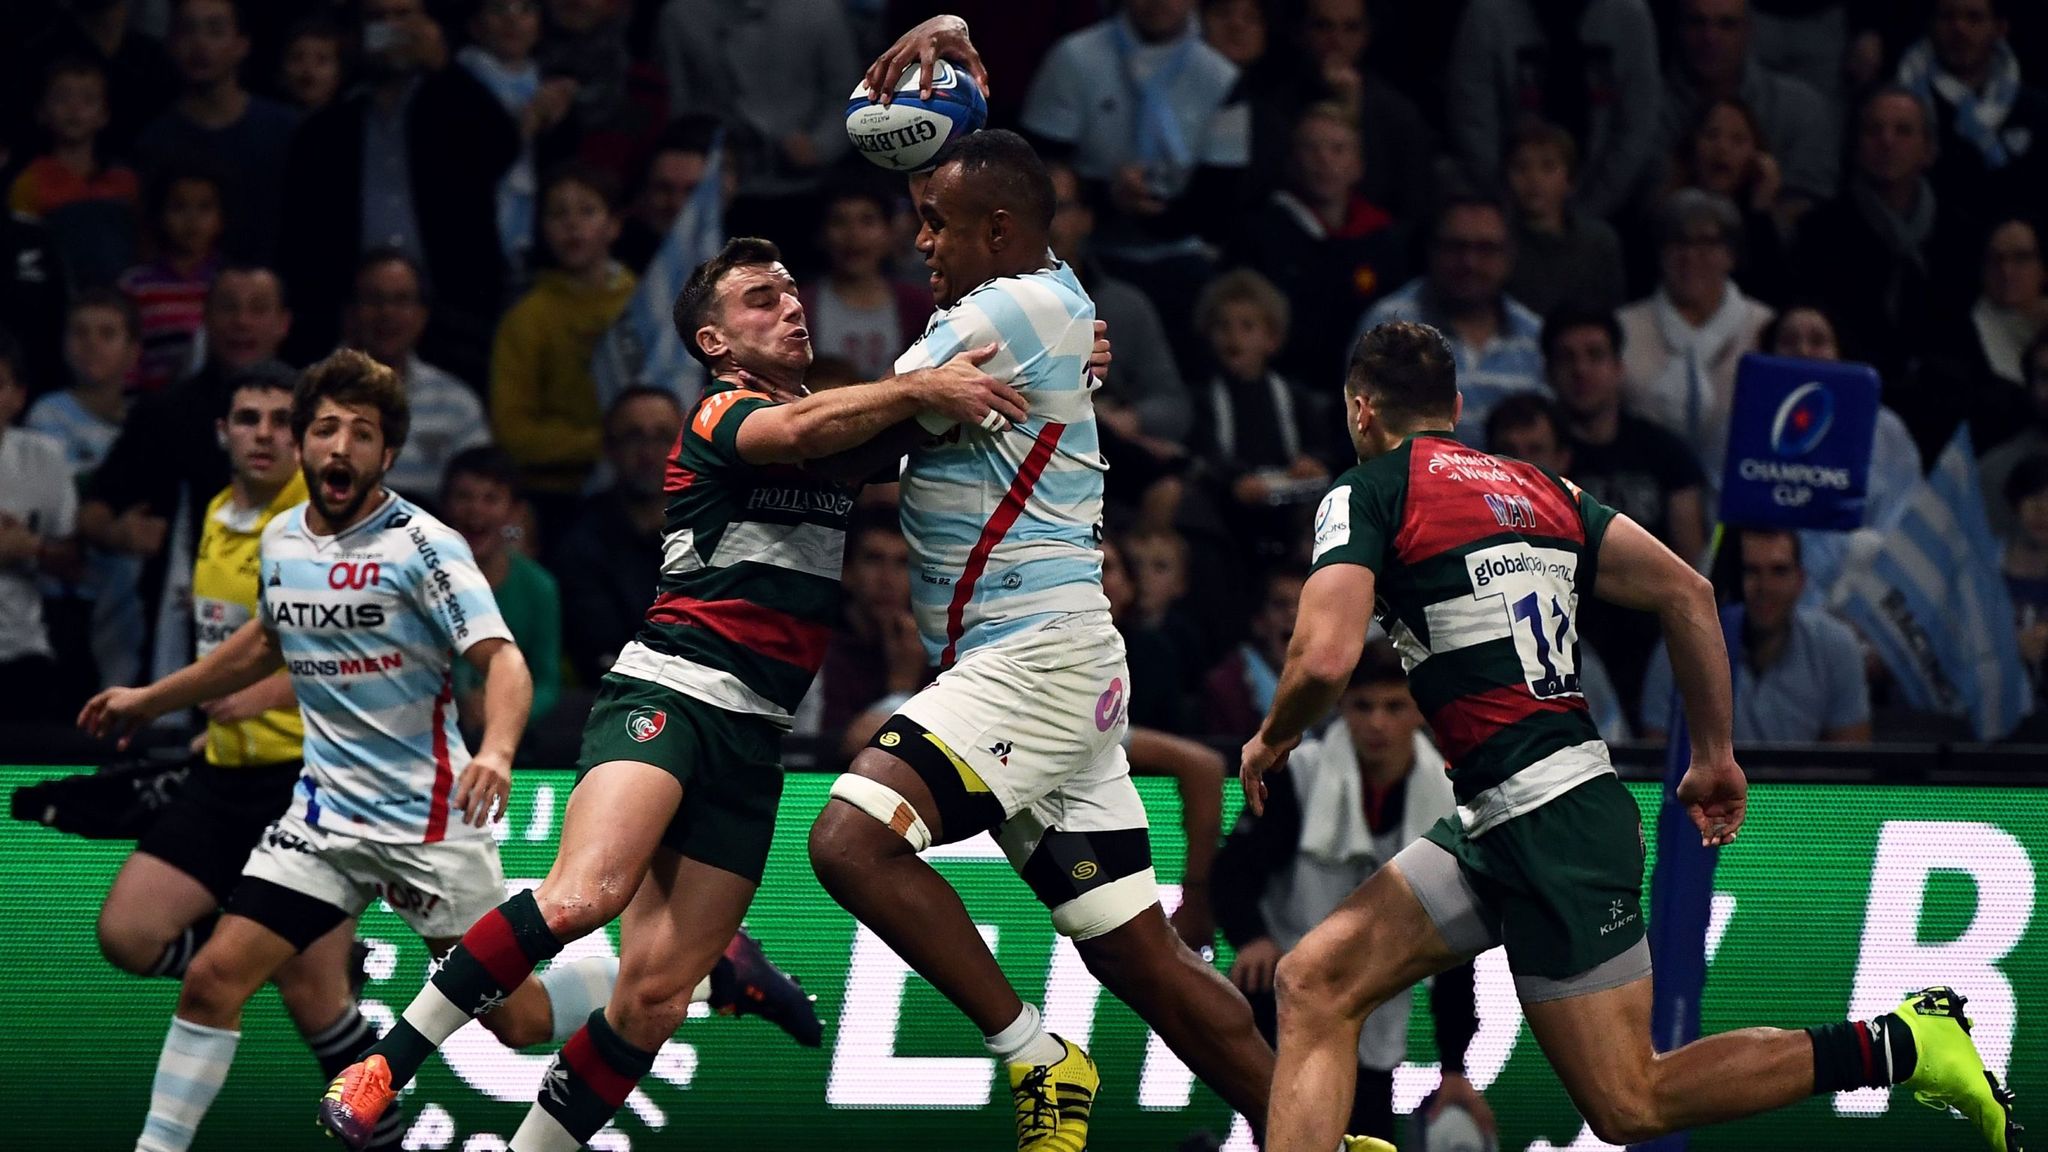 Super Rugby, Las Vegas Sevens and Top 14 live on Sky Sports Rugby Union News Sky Sports